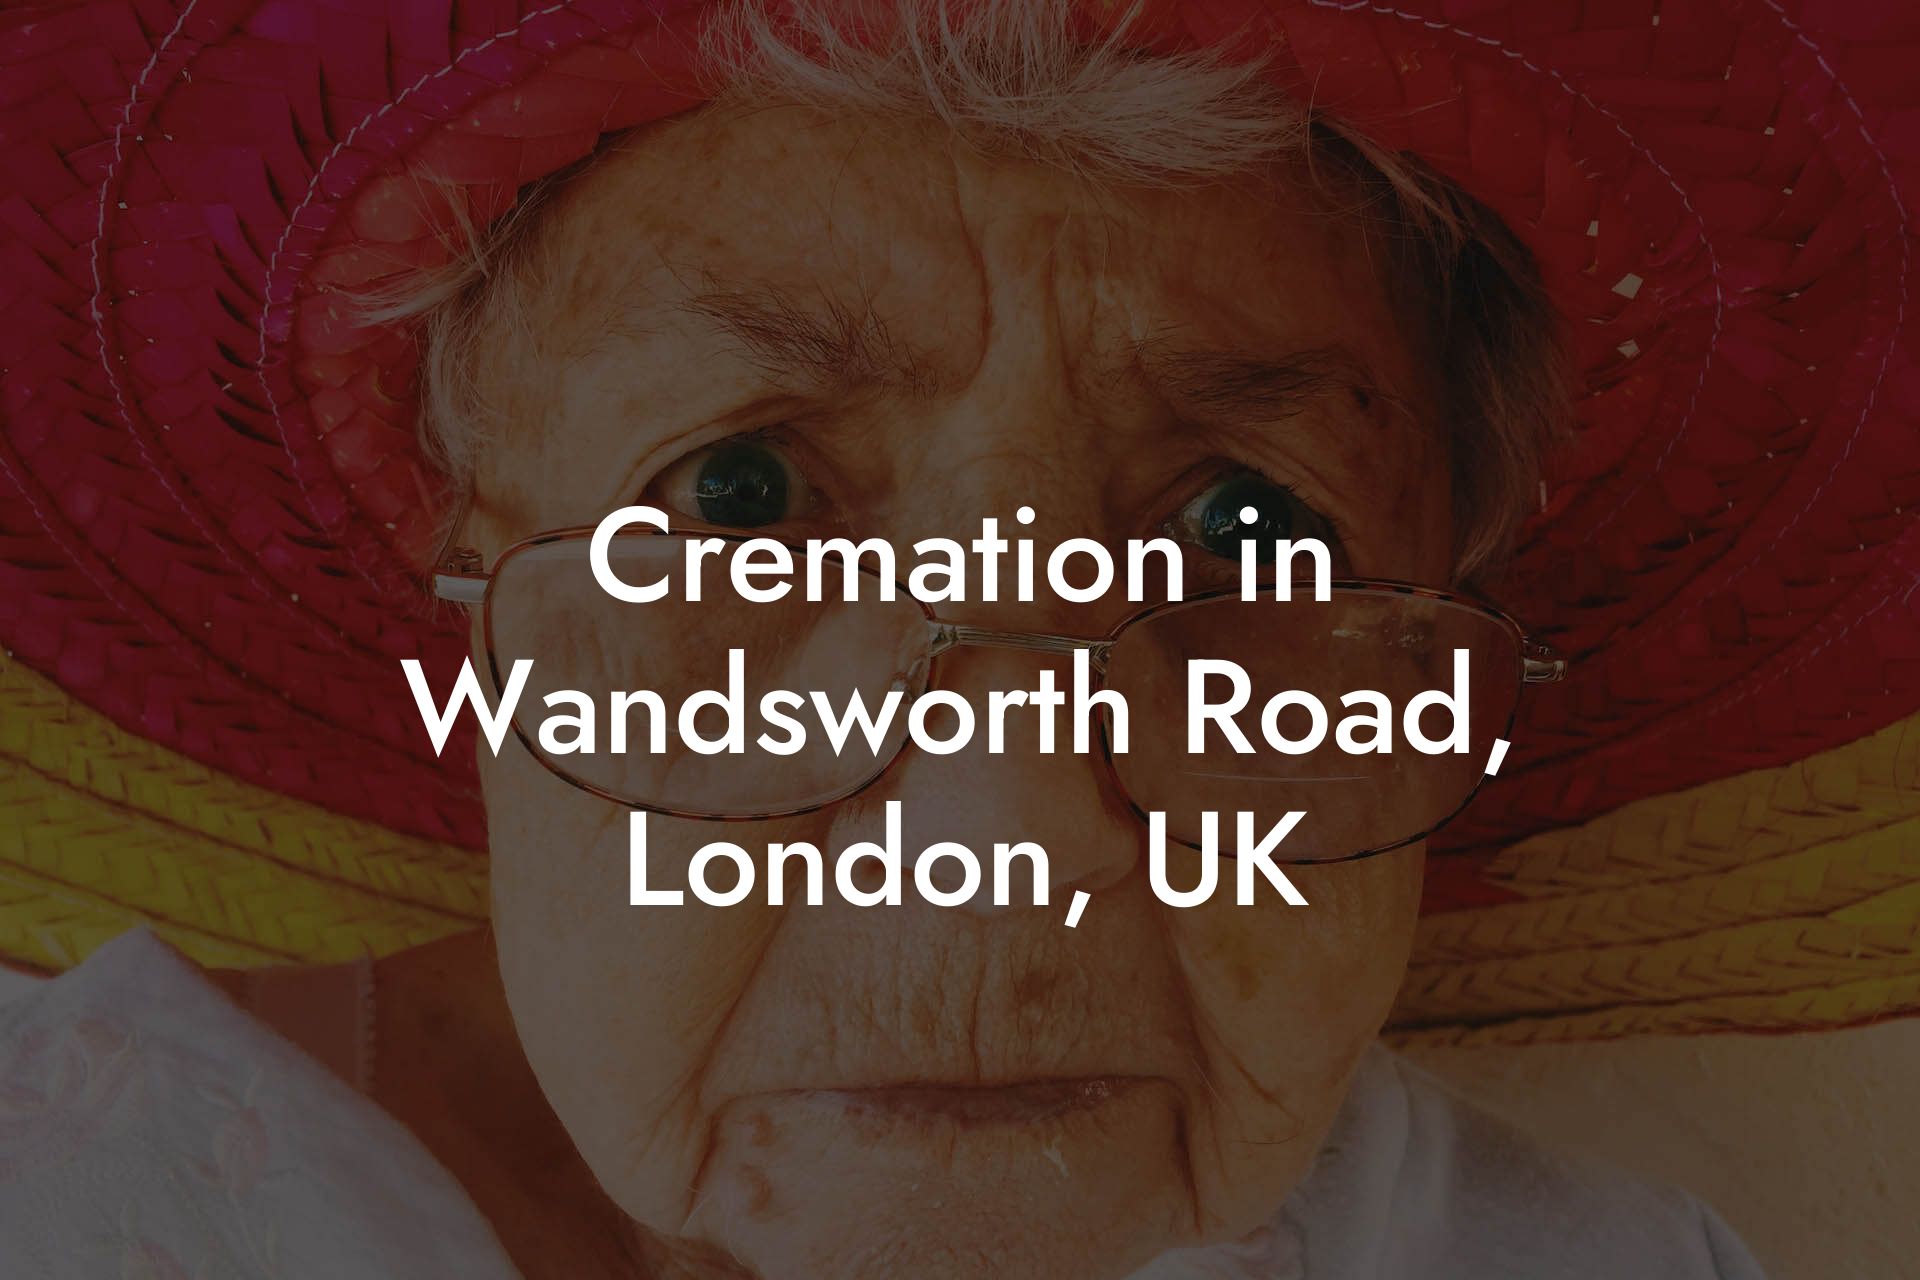 Cremation in Wandsworth Road, London, UK